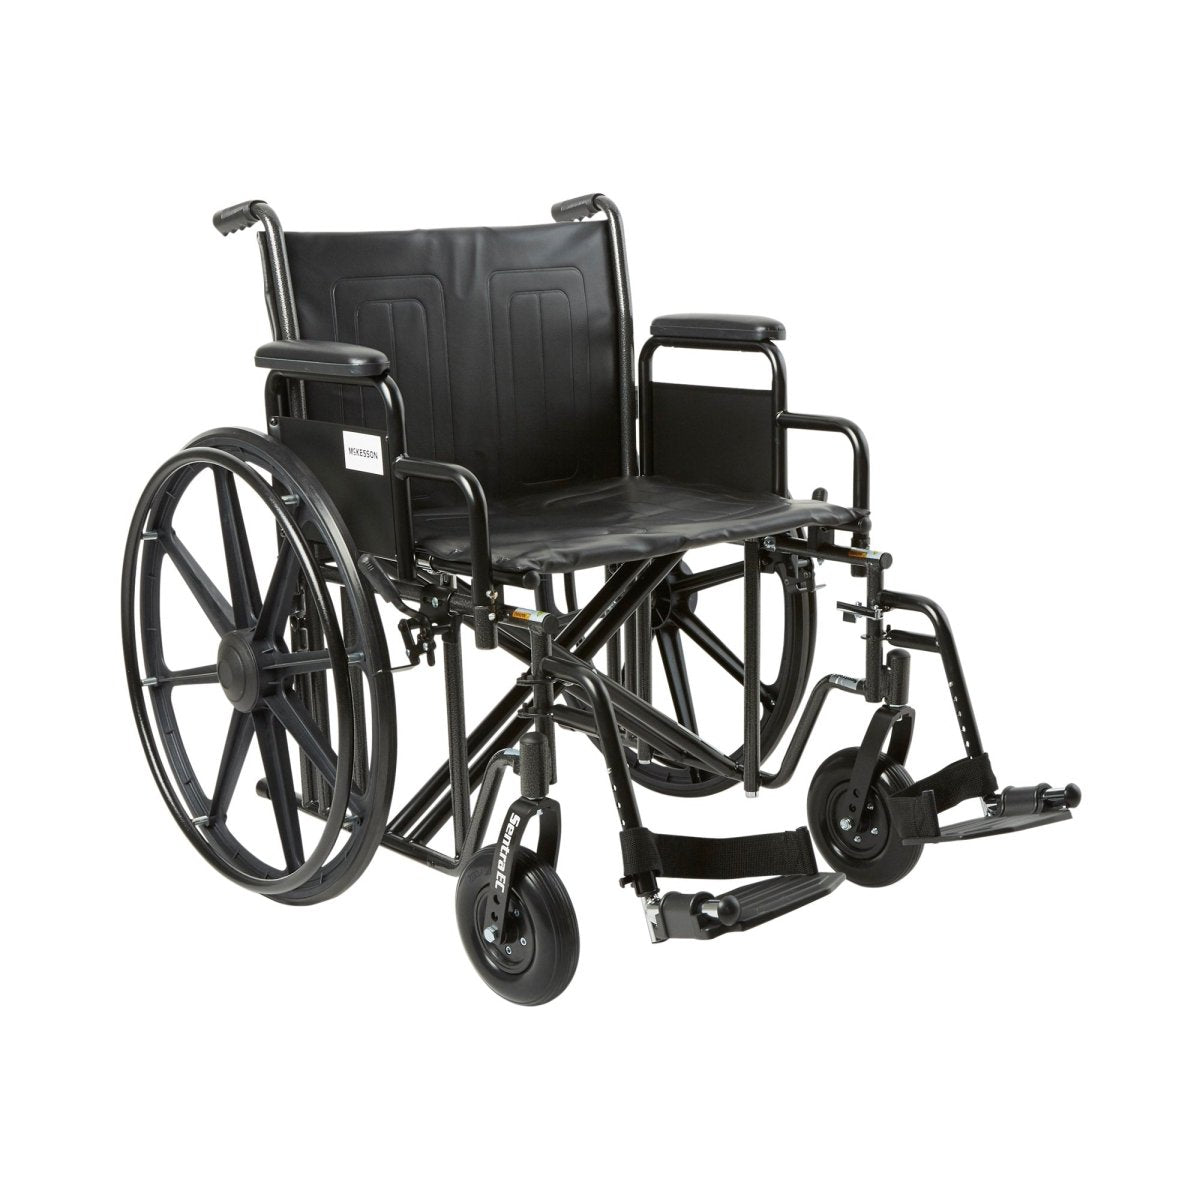 McKesson Bariatric Wheelchair with Swing-Away Footrest - 1065280_EA - 2